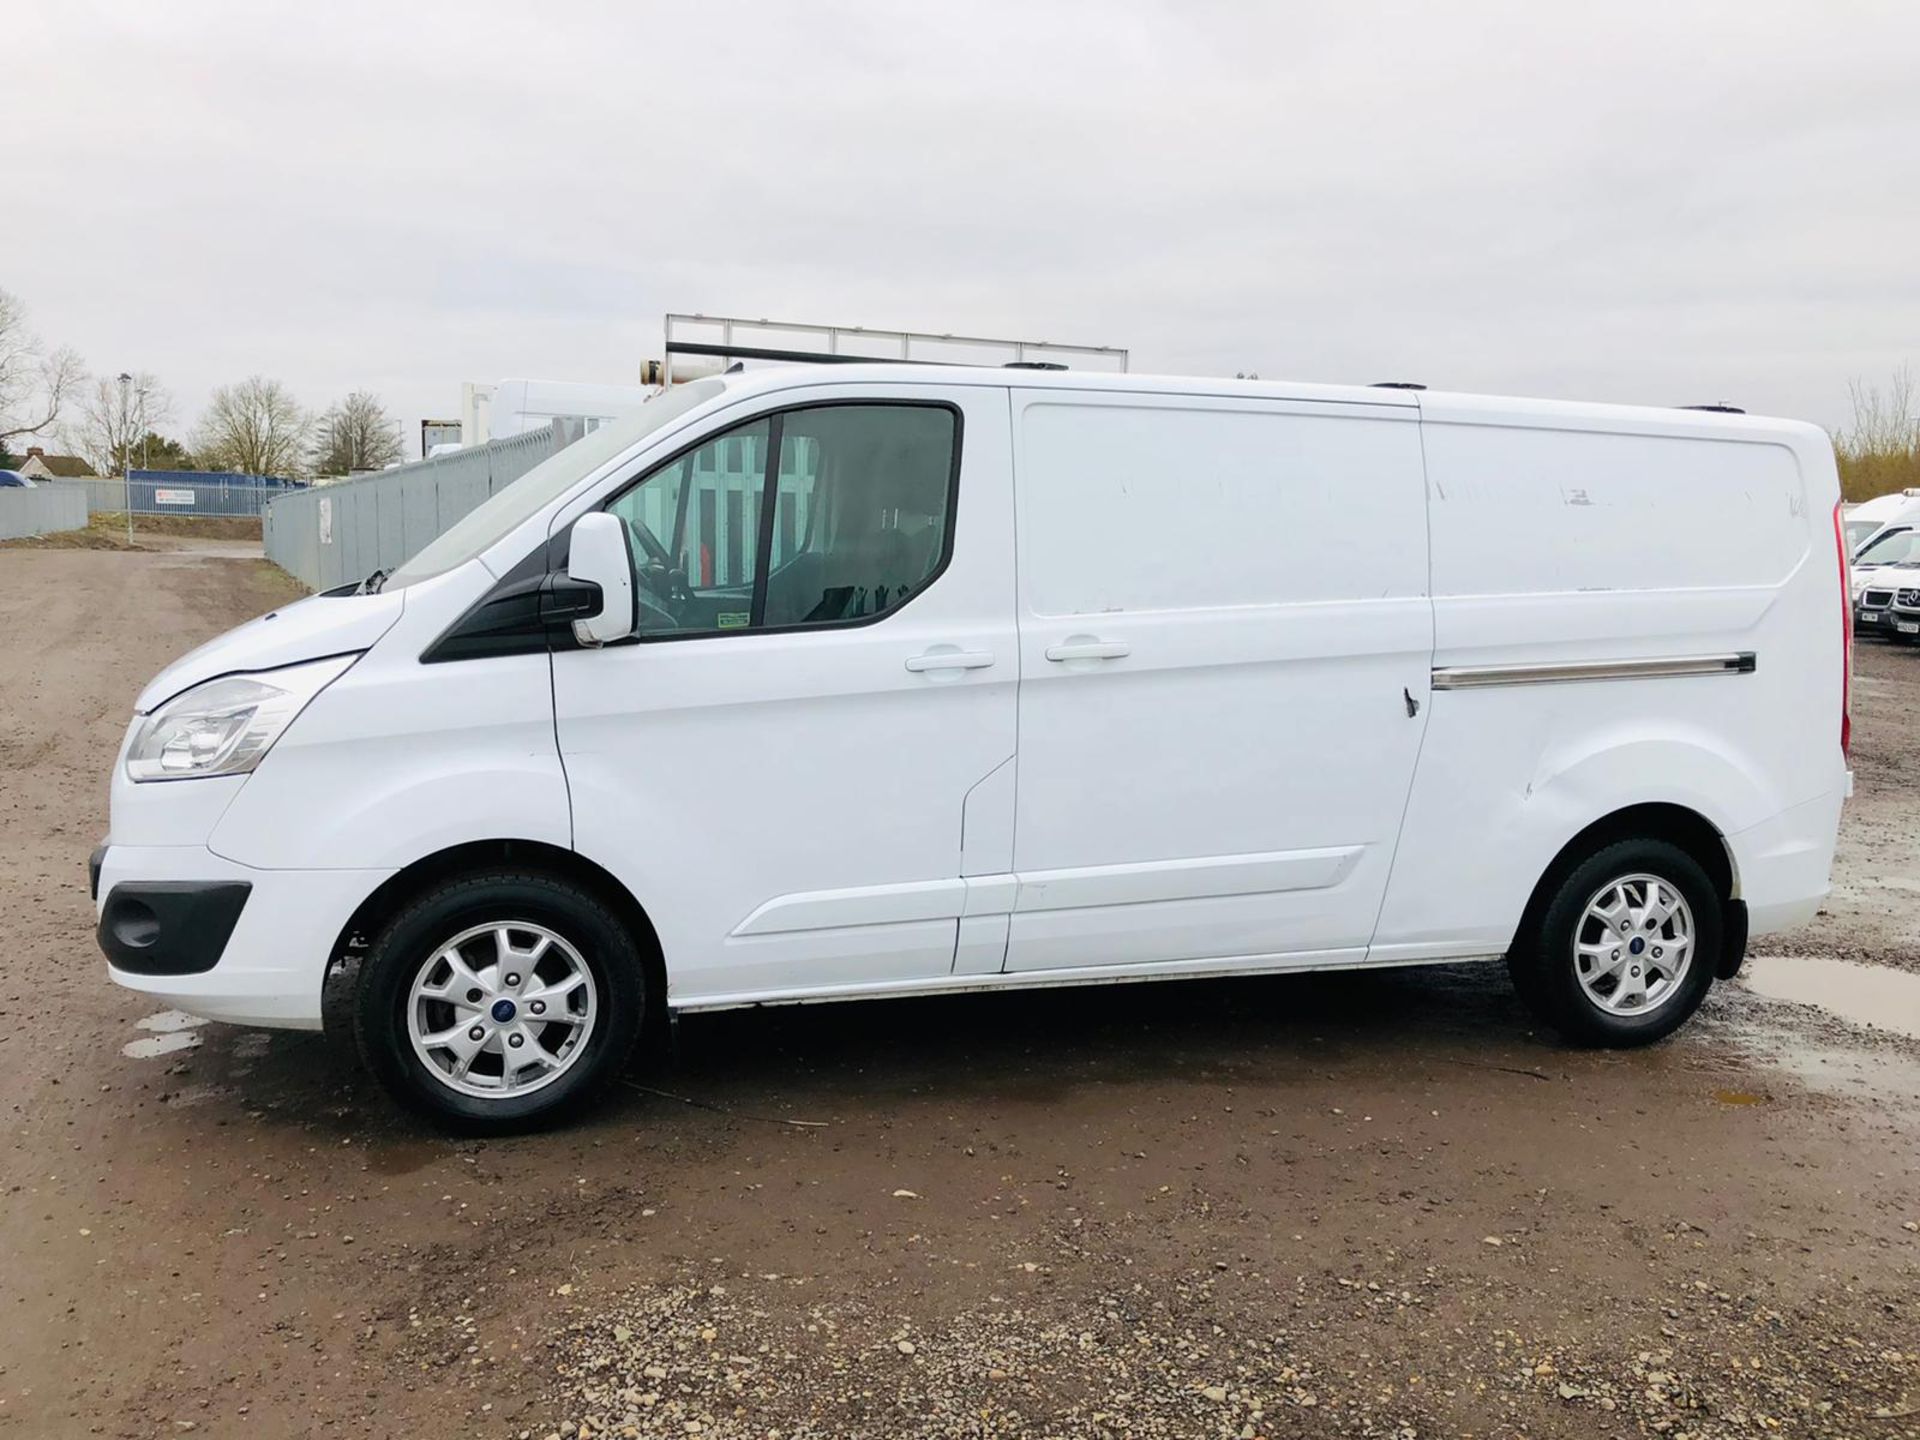 **ON SALE**Ford Transit 2.2 TDCI 125 E-Tech 290 Limited L2 H1 2015 '15 Reg' Air Con - Cruise Control - Image 17 of 33